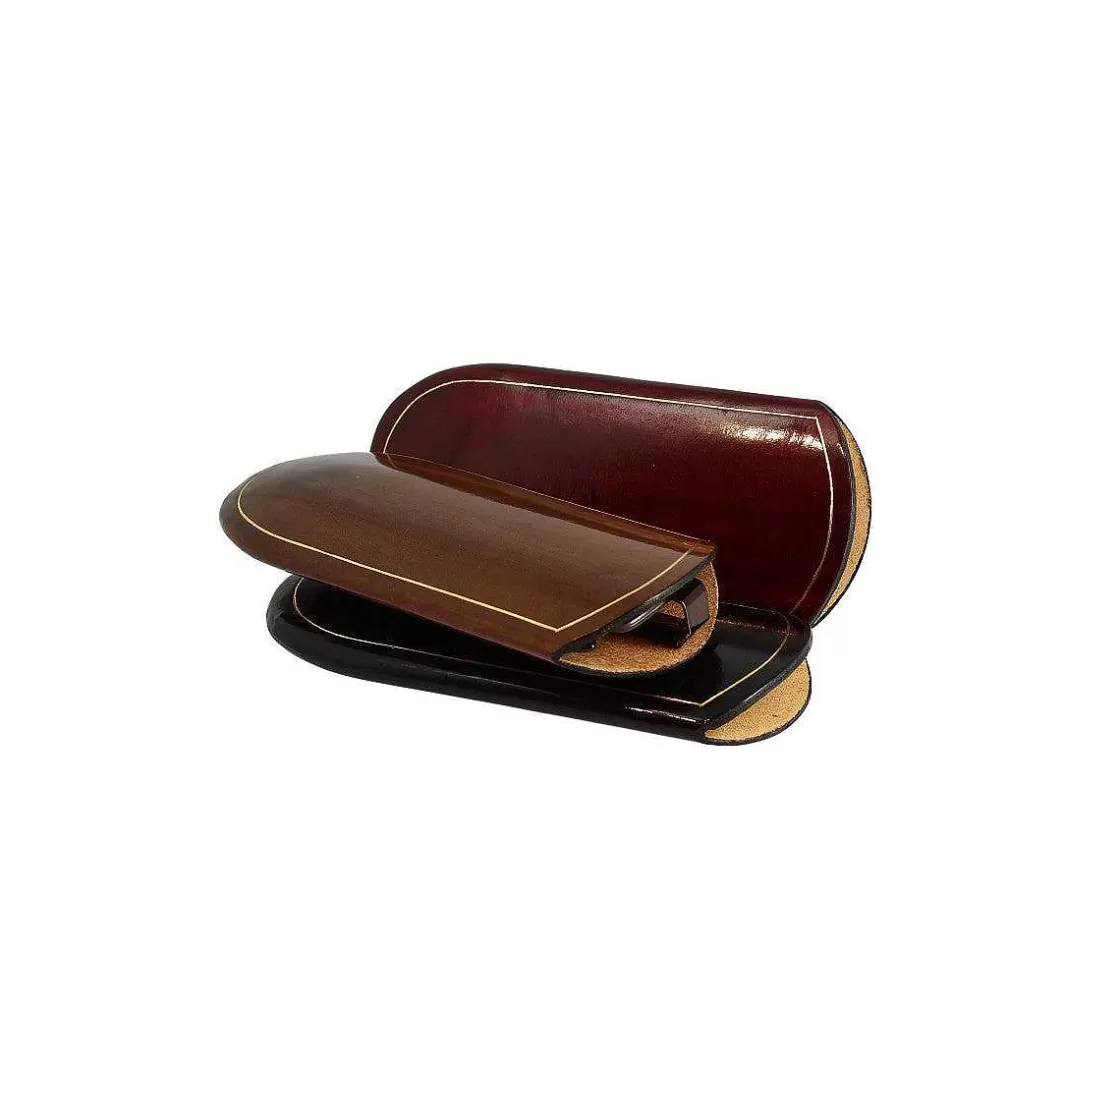 Leonardo Medium Pocket Glasses Case Made Of Leather Available In Various Colors Best